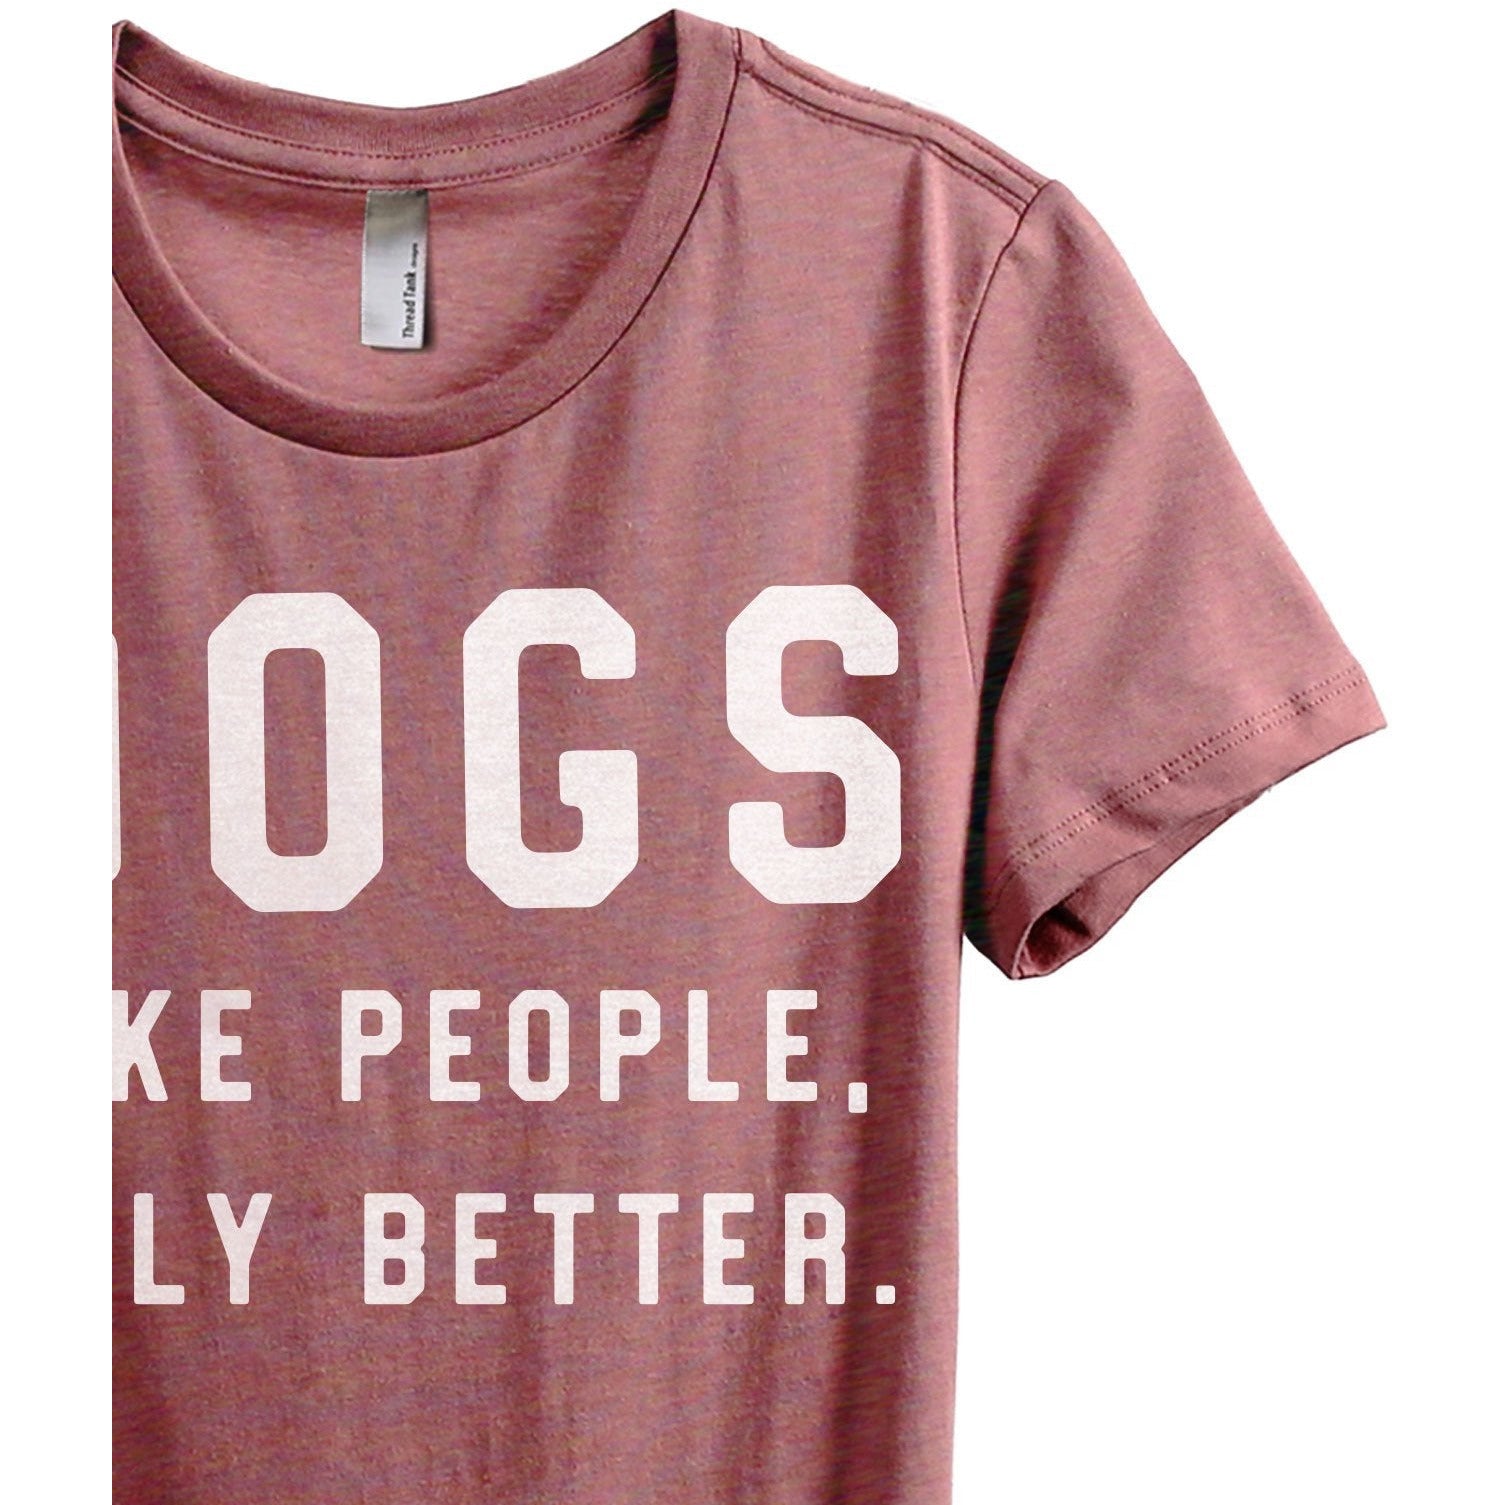 Dogs Like People Only Better Women's Relaxed Crewneck T-Shirt Top Tee Heather Rouge Zoom Details
